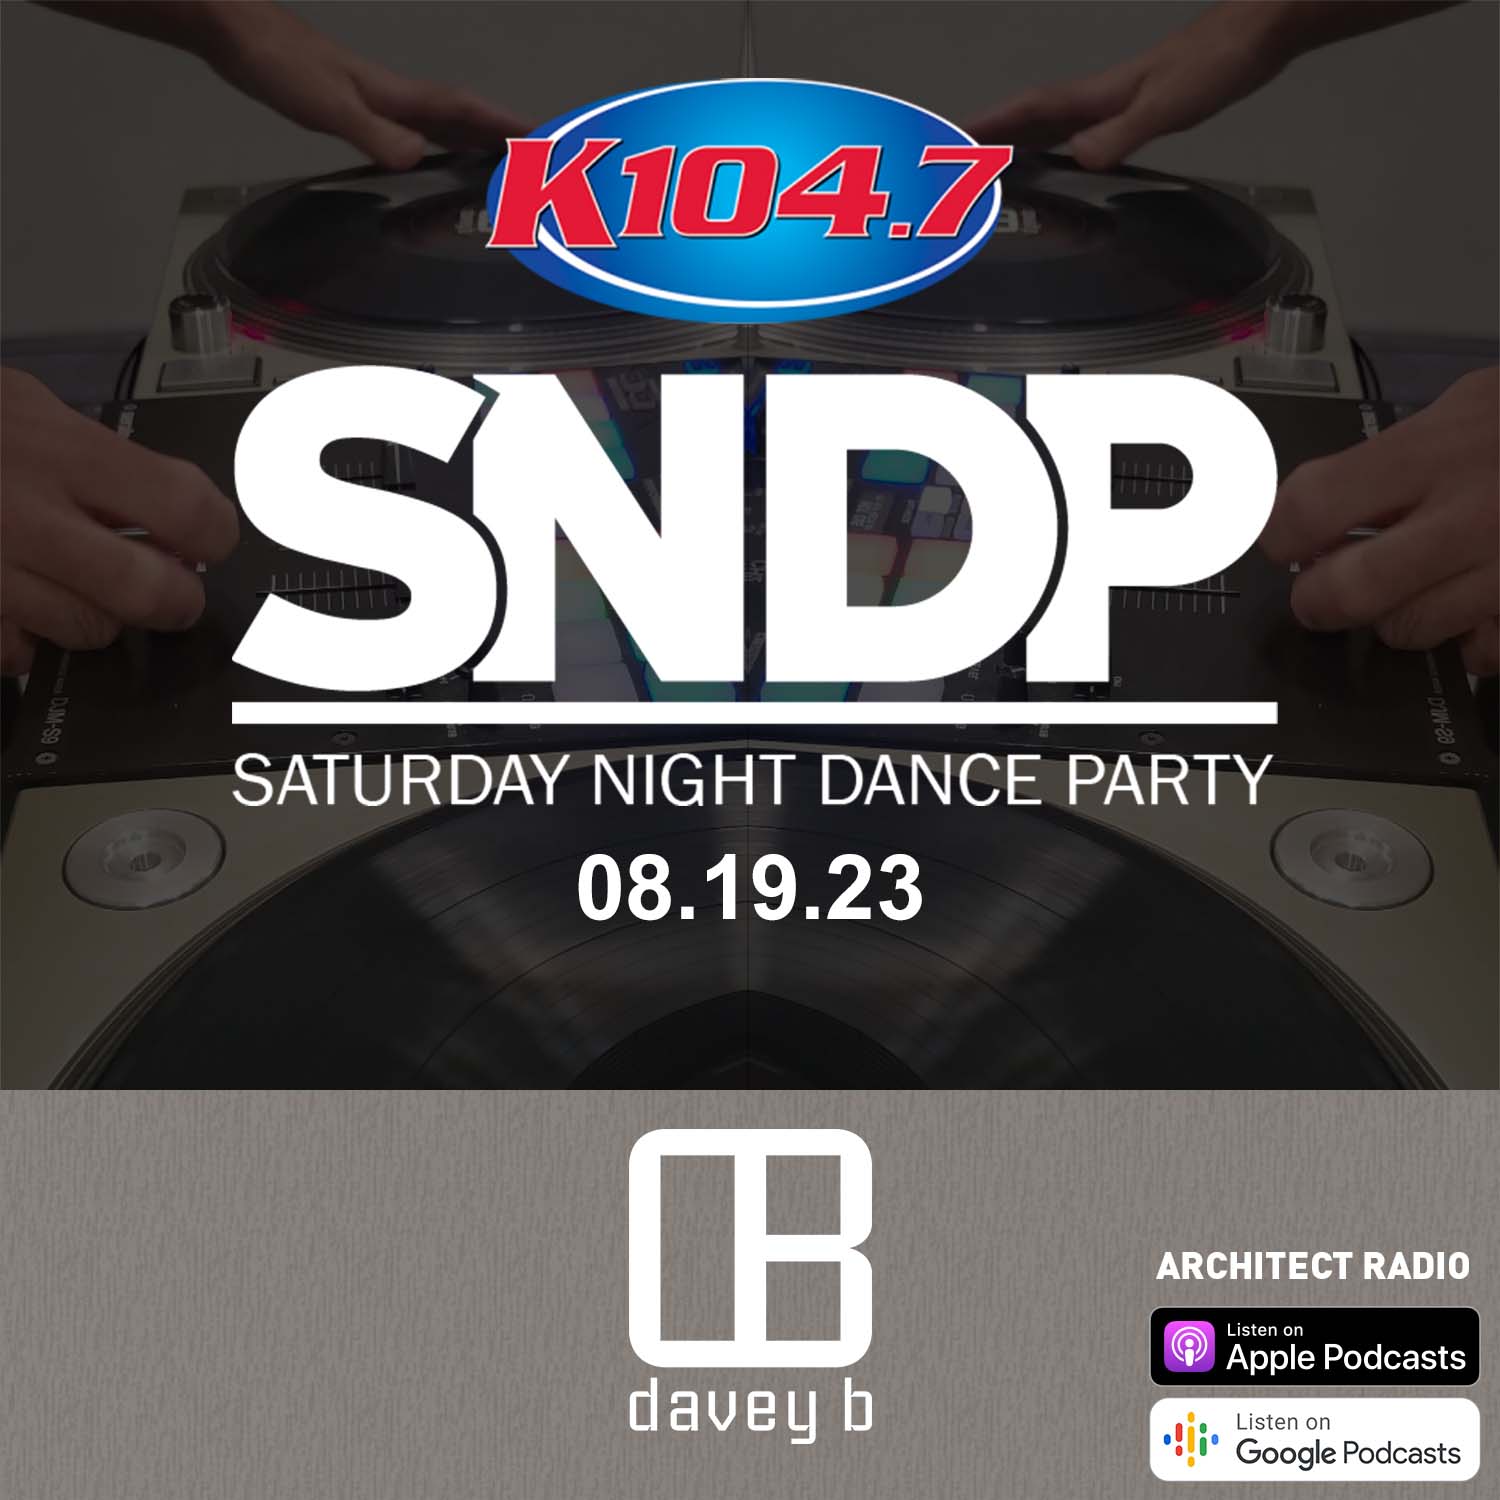 Saturday Night Dance Party on K104